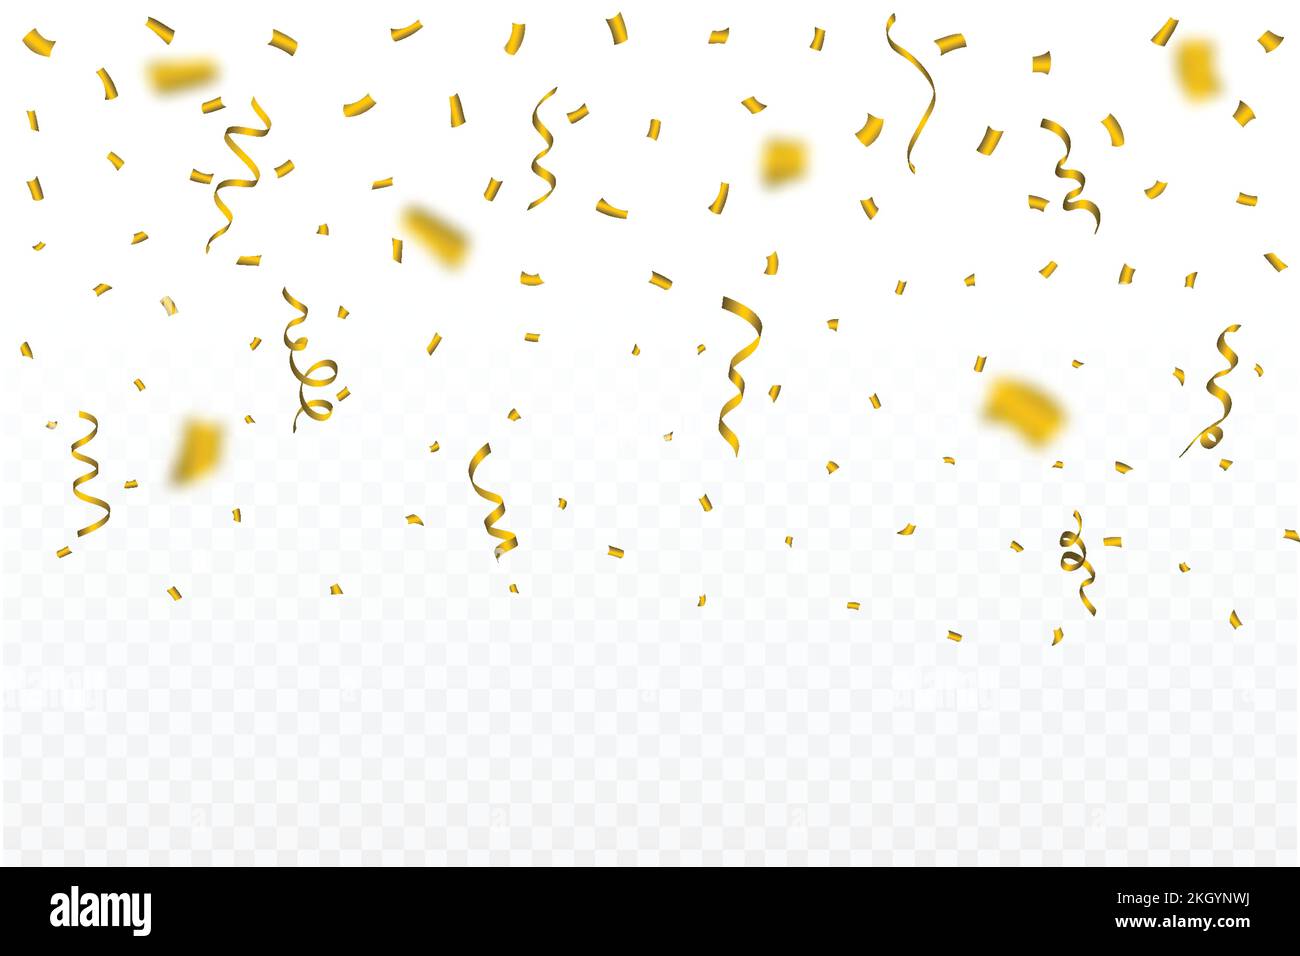 Confetti vector illustration for the carnival background. Golden party tinsel and confetti falling. Golden confetti isolated on transparent background Stock Vector